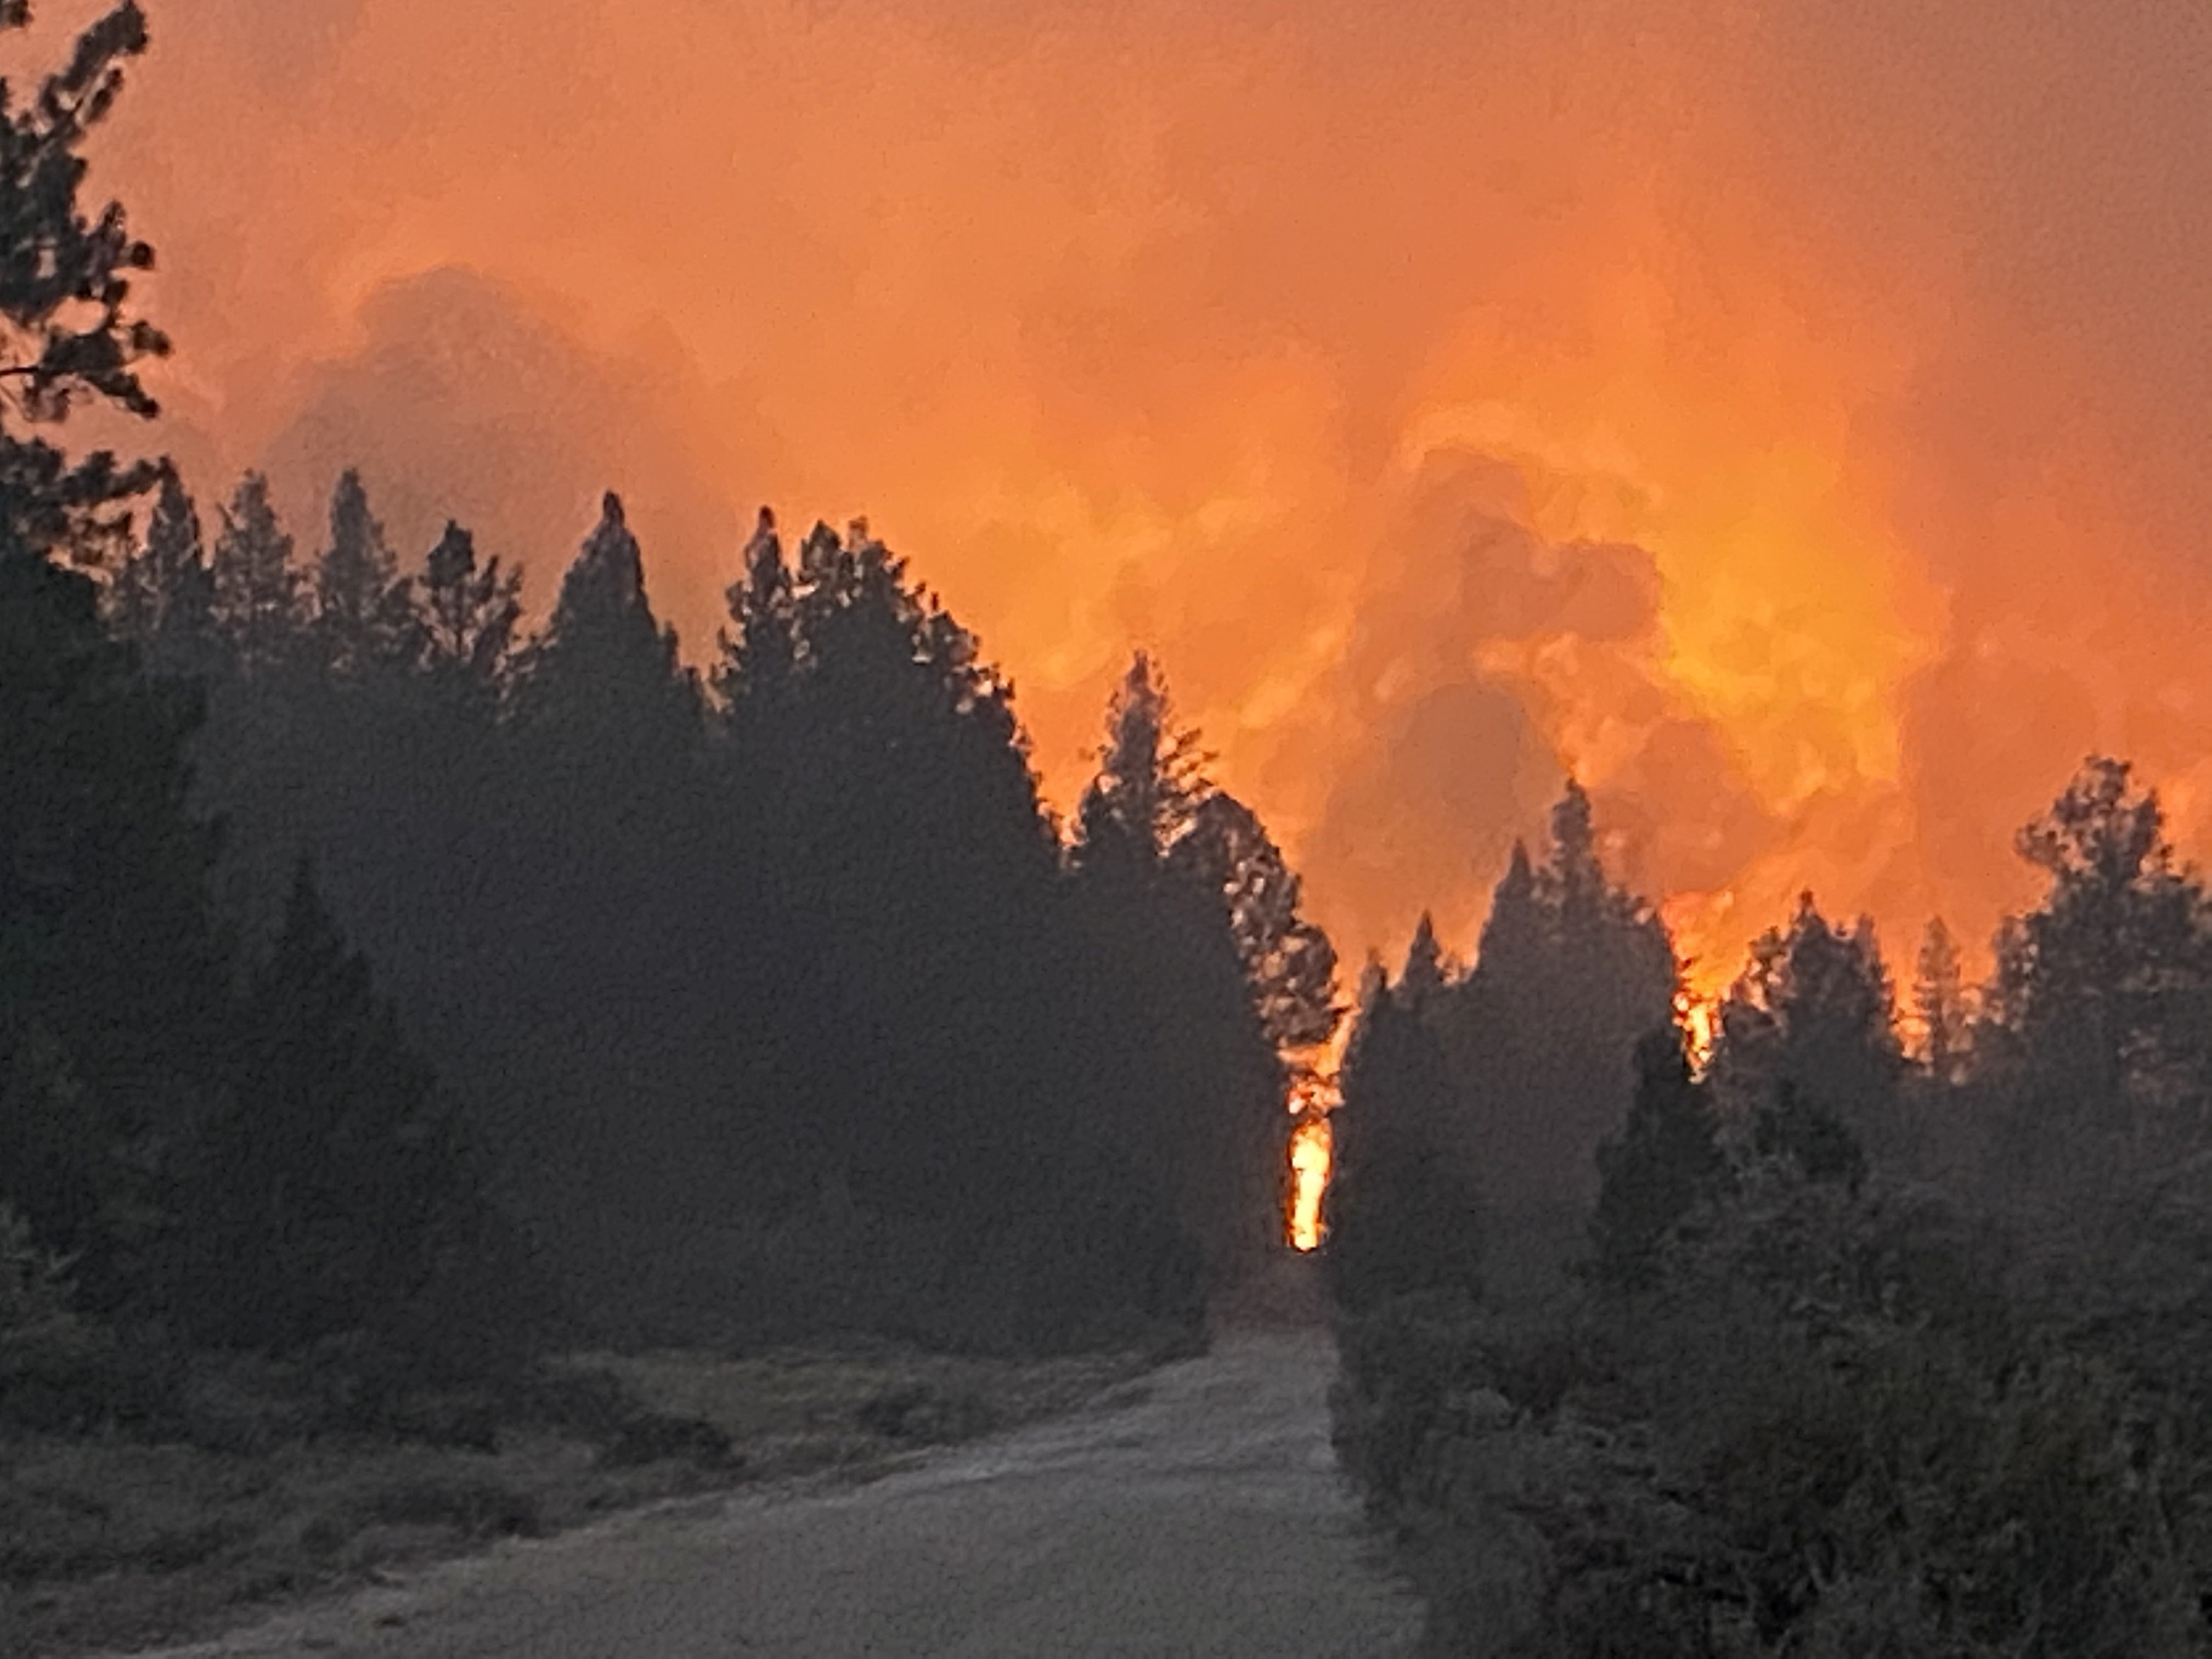 U.S. at Highest Alert Level as Wildfires Rage Across 12 Western States